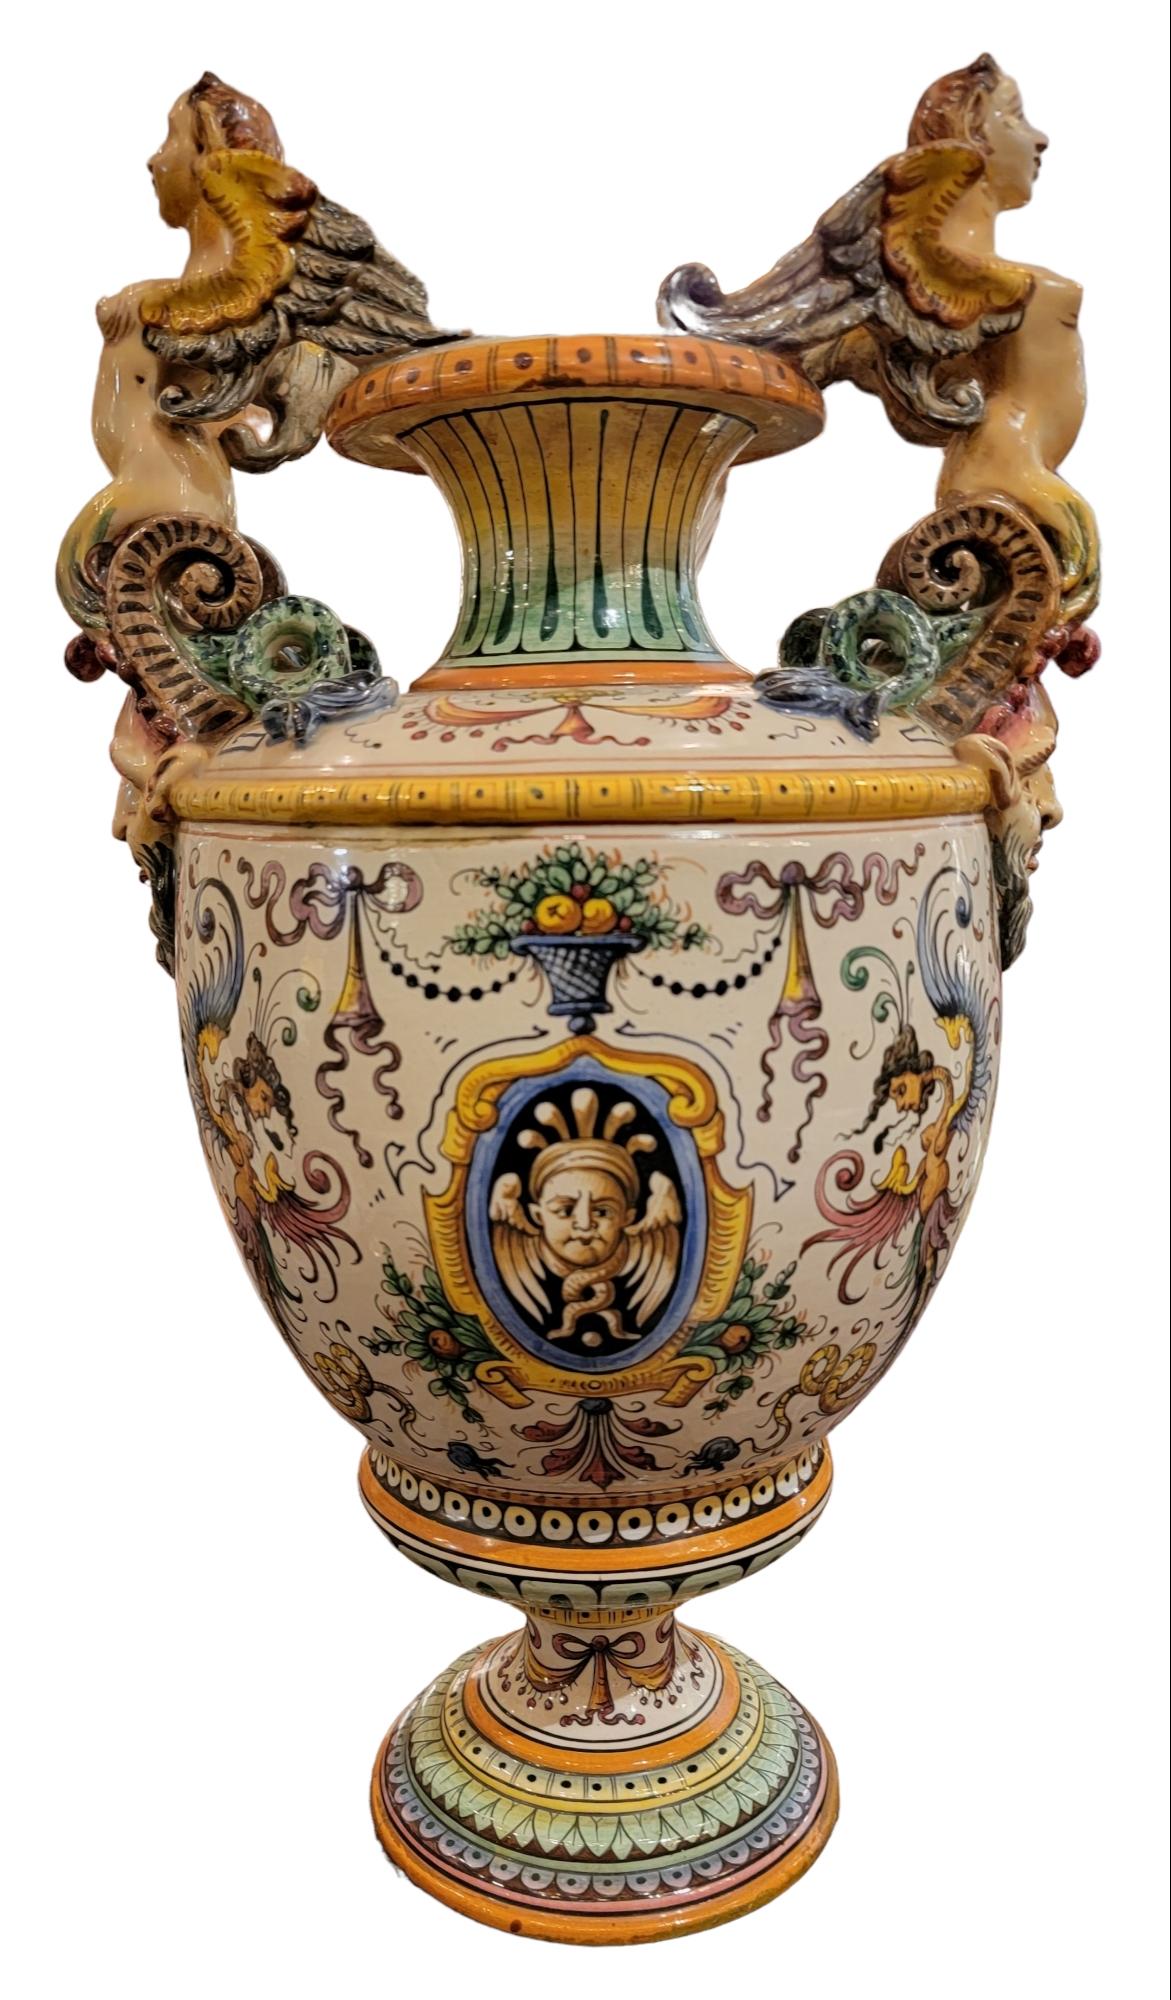 Antique Italian Majolica Ornate Urns. Wonderful Italian Majolica beautiful colors and designs. The serpentine woman handles ad a wonderful touch of power to the look.